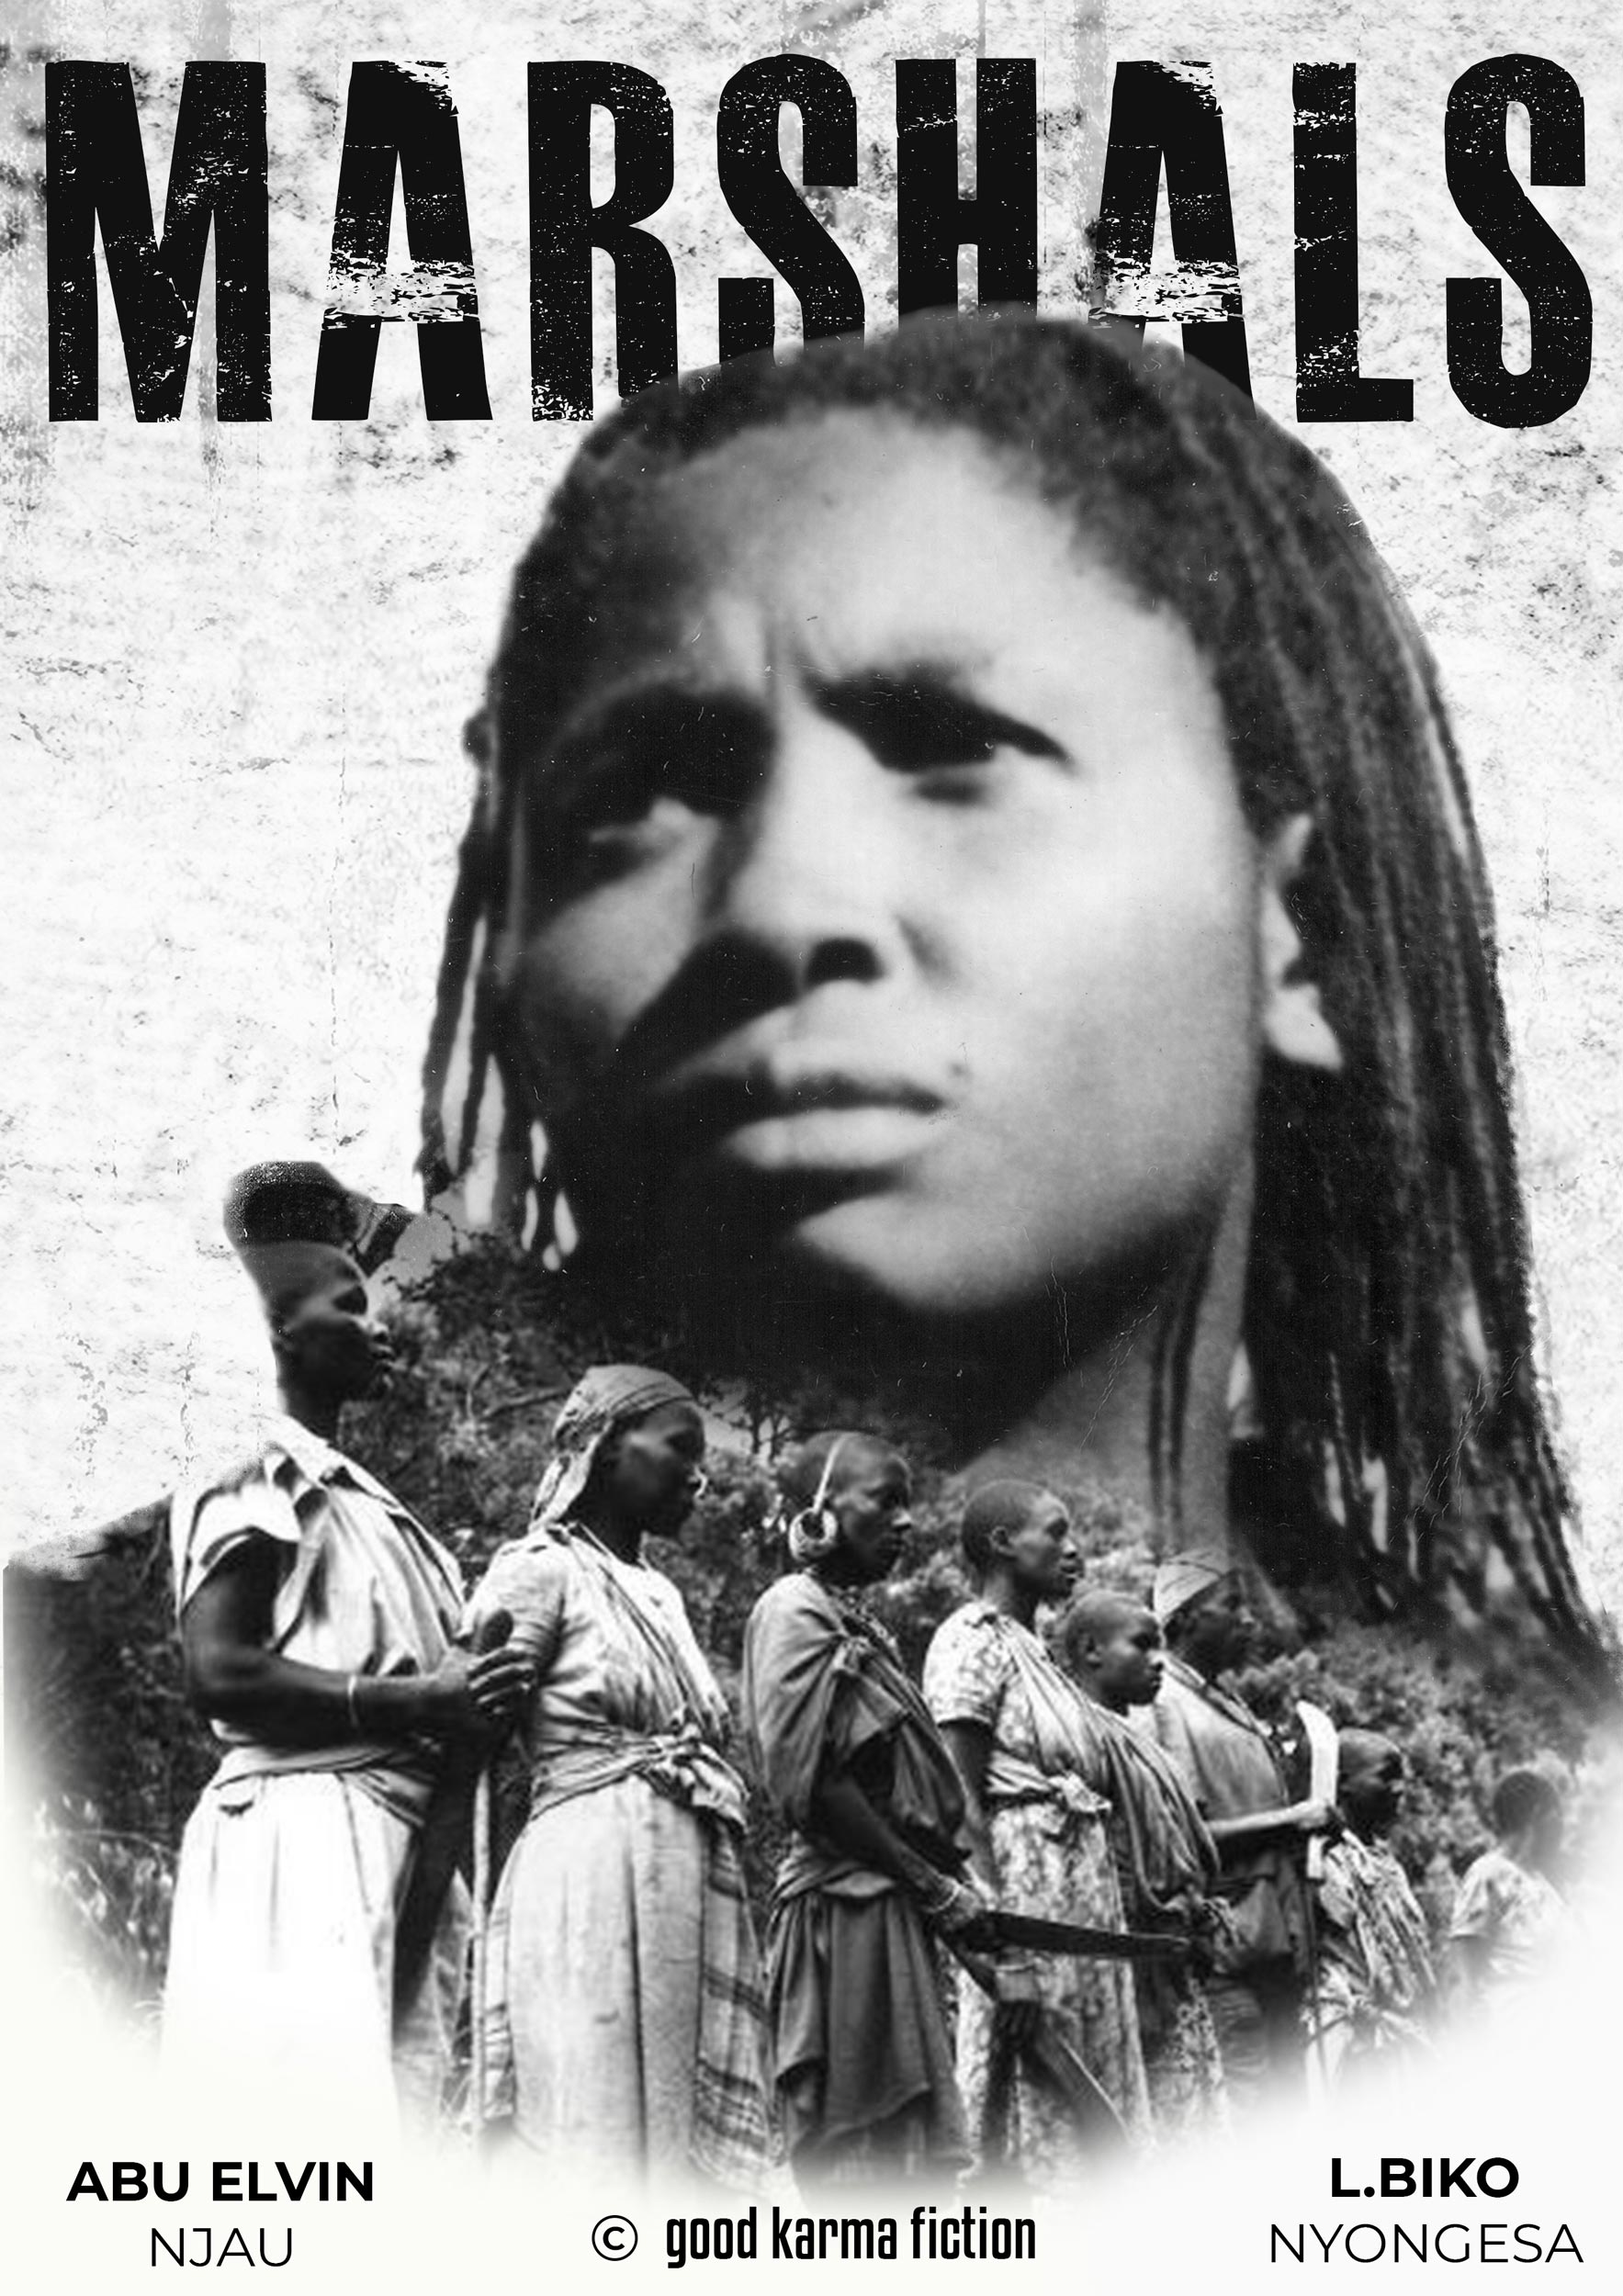 <i  id="iconinf1" class="fas fa-info" aria-hidden="true"></i><br> <h3>MARSHALS</h3><br><p> Kenya, 1956. A teenage girl is forced to flee into the unforgiving Abadare’s forest after colonial authorities subdue her village, but until she meets a skilled and vengeful field marshal, her family will never know freedom … <br><br><b>-Feature Film, 90 Min., Cinema-<BR> In Financing</b></p>